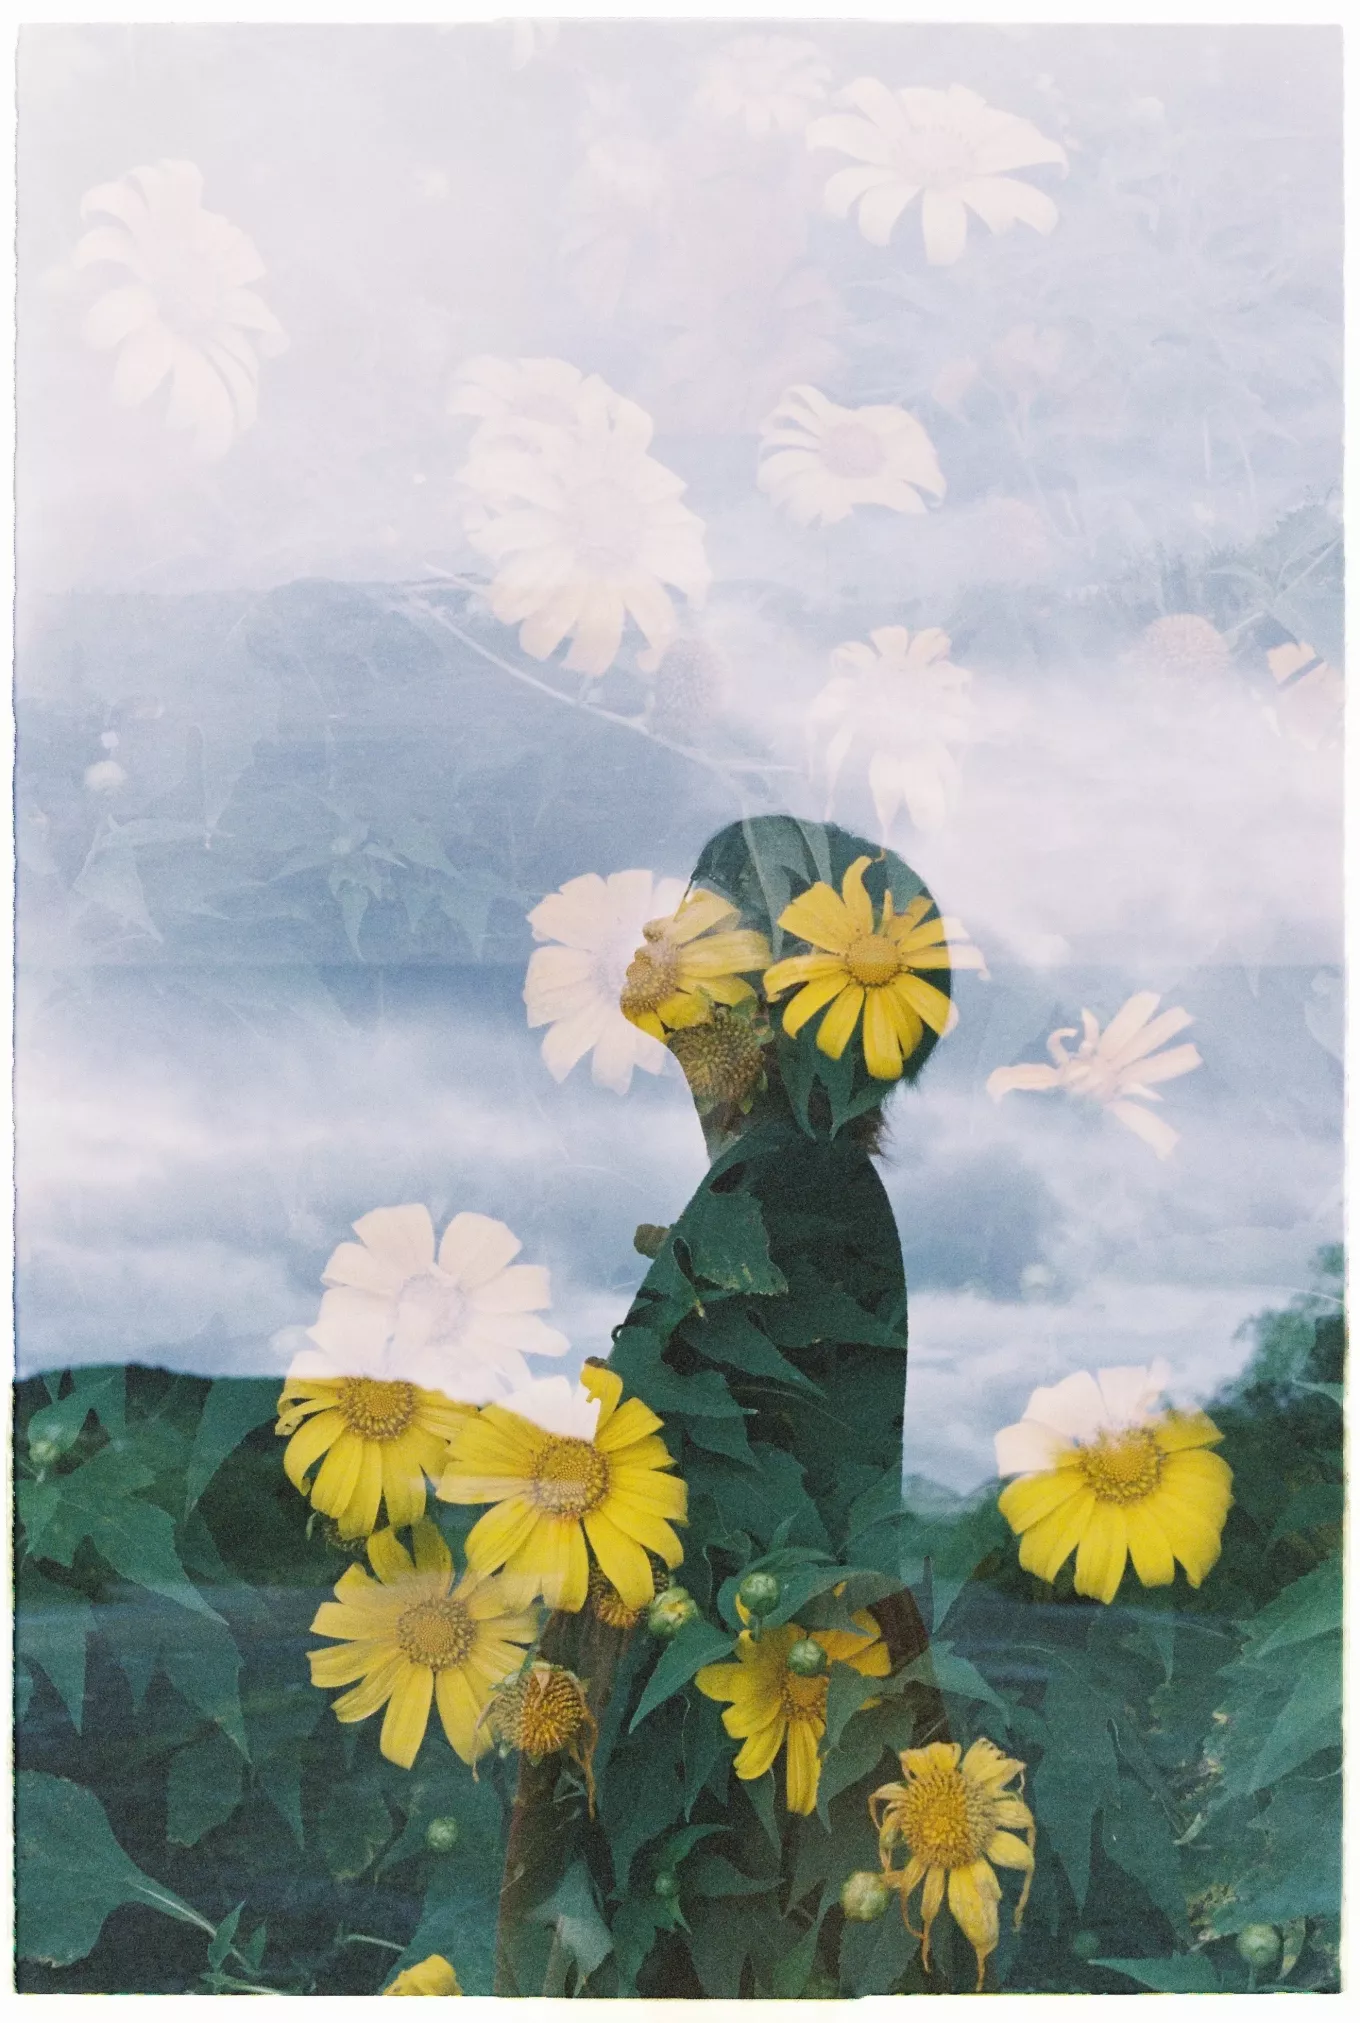 Photo of a woman's silhouette superimposed on a background of yellow flowers